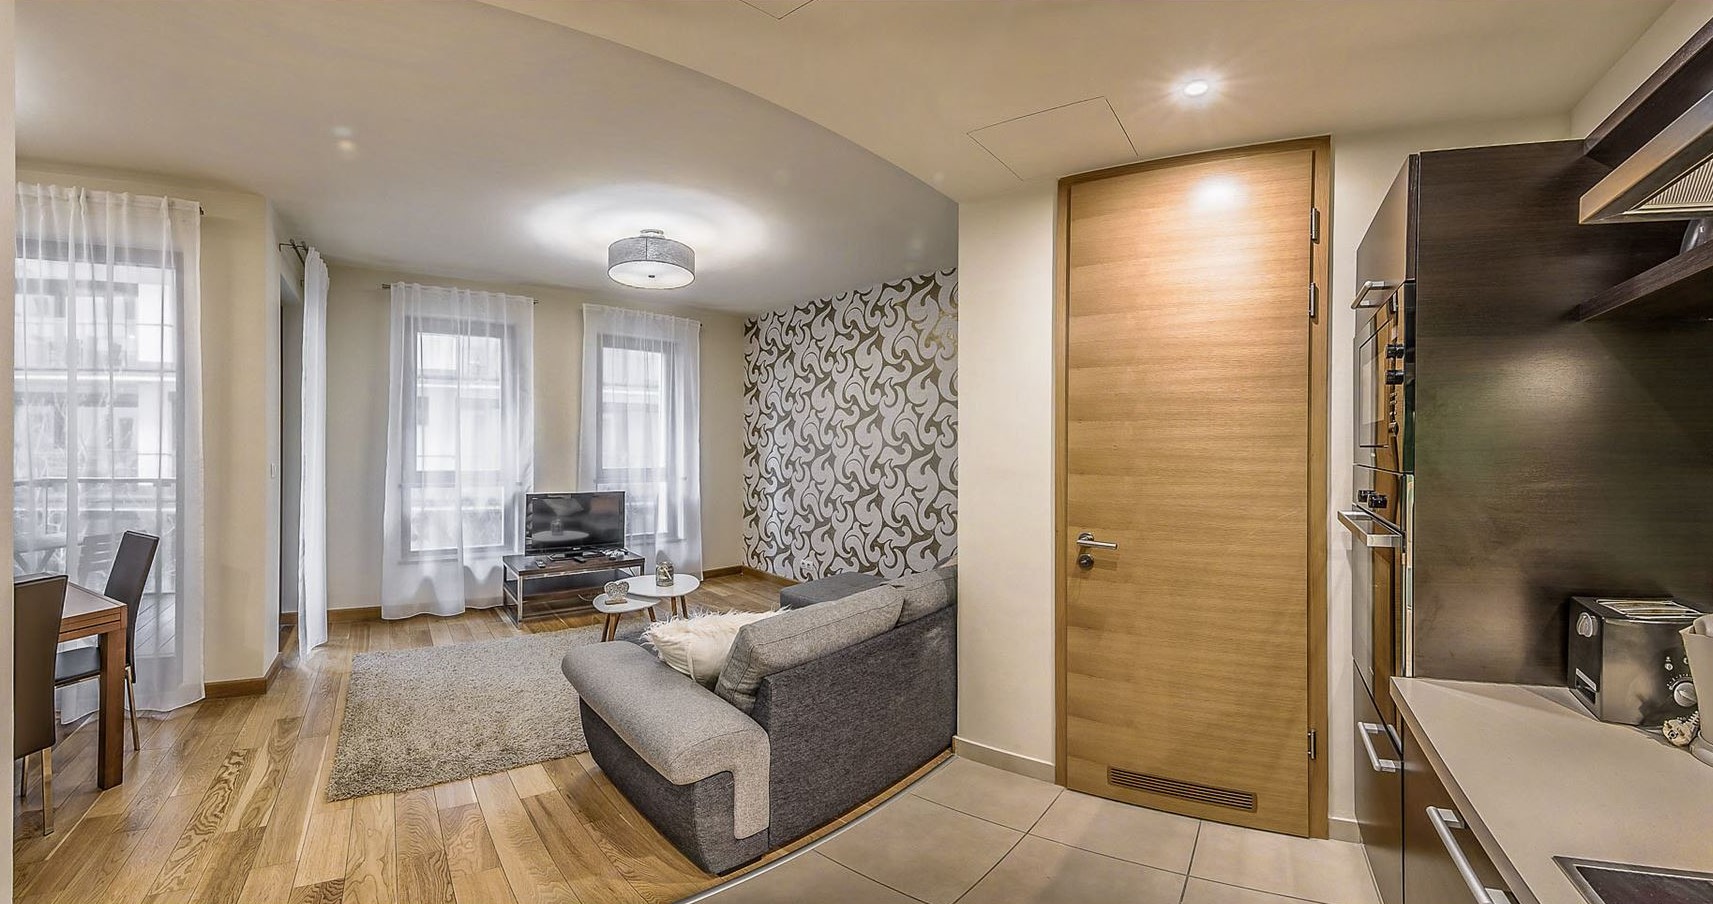 budapest-rental-avenue-gardens-flat-apartment-for-rent-with-garage-terrace-long-term-lease-downtown-district-6-1-bedroom-apartment-newly-built-flat-for-rent10